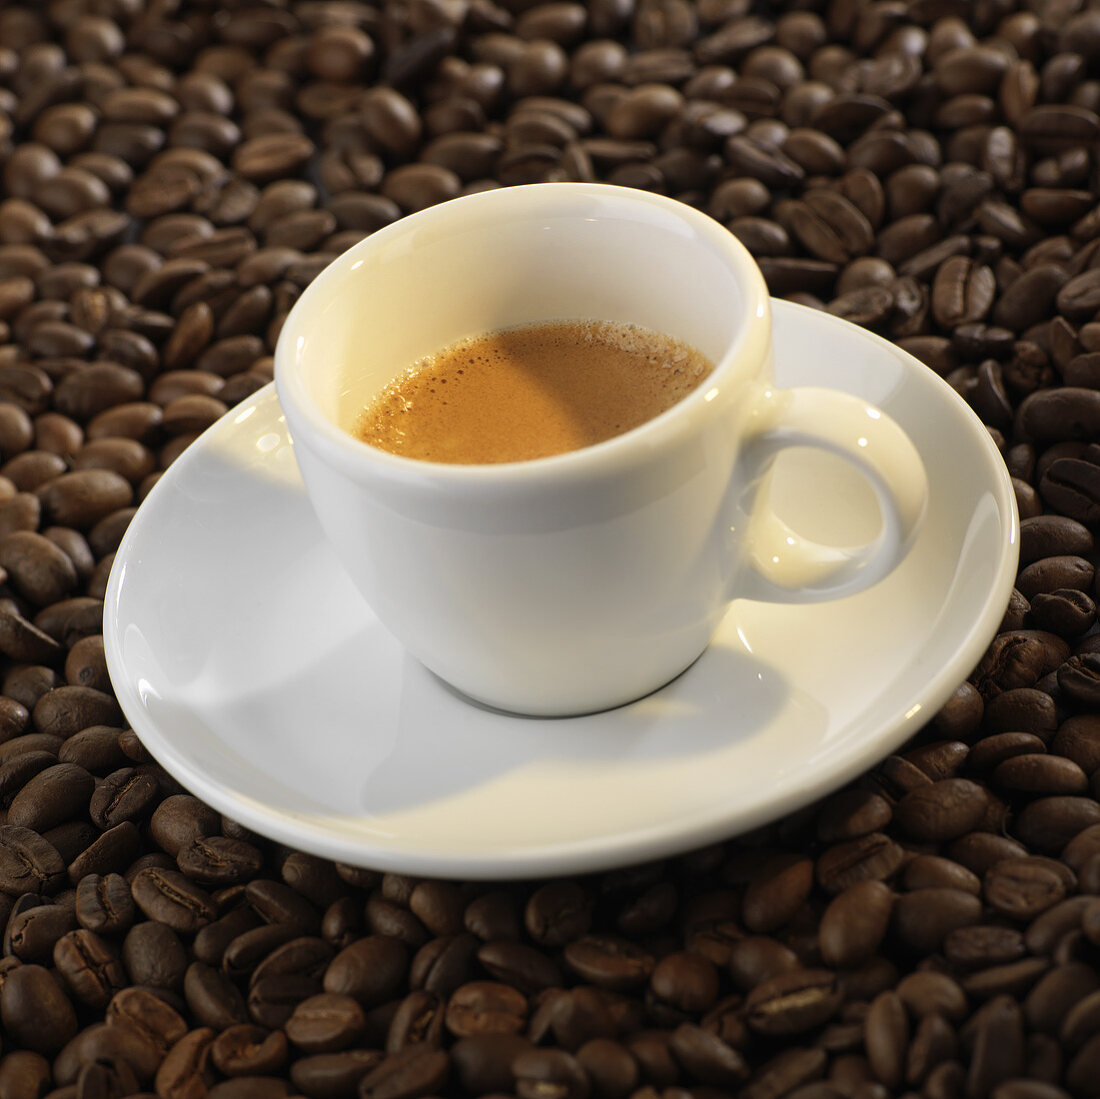 A cup of espresso on coffee beans